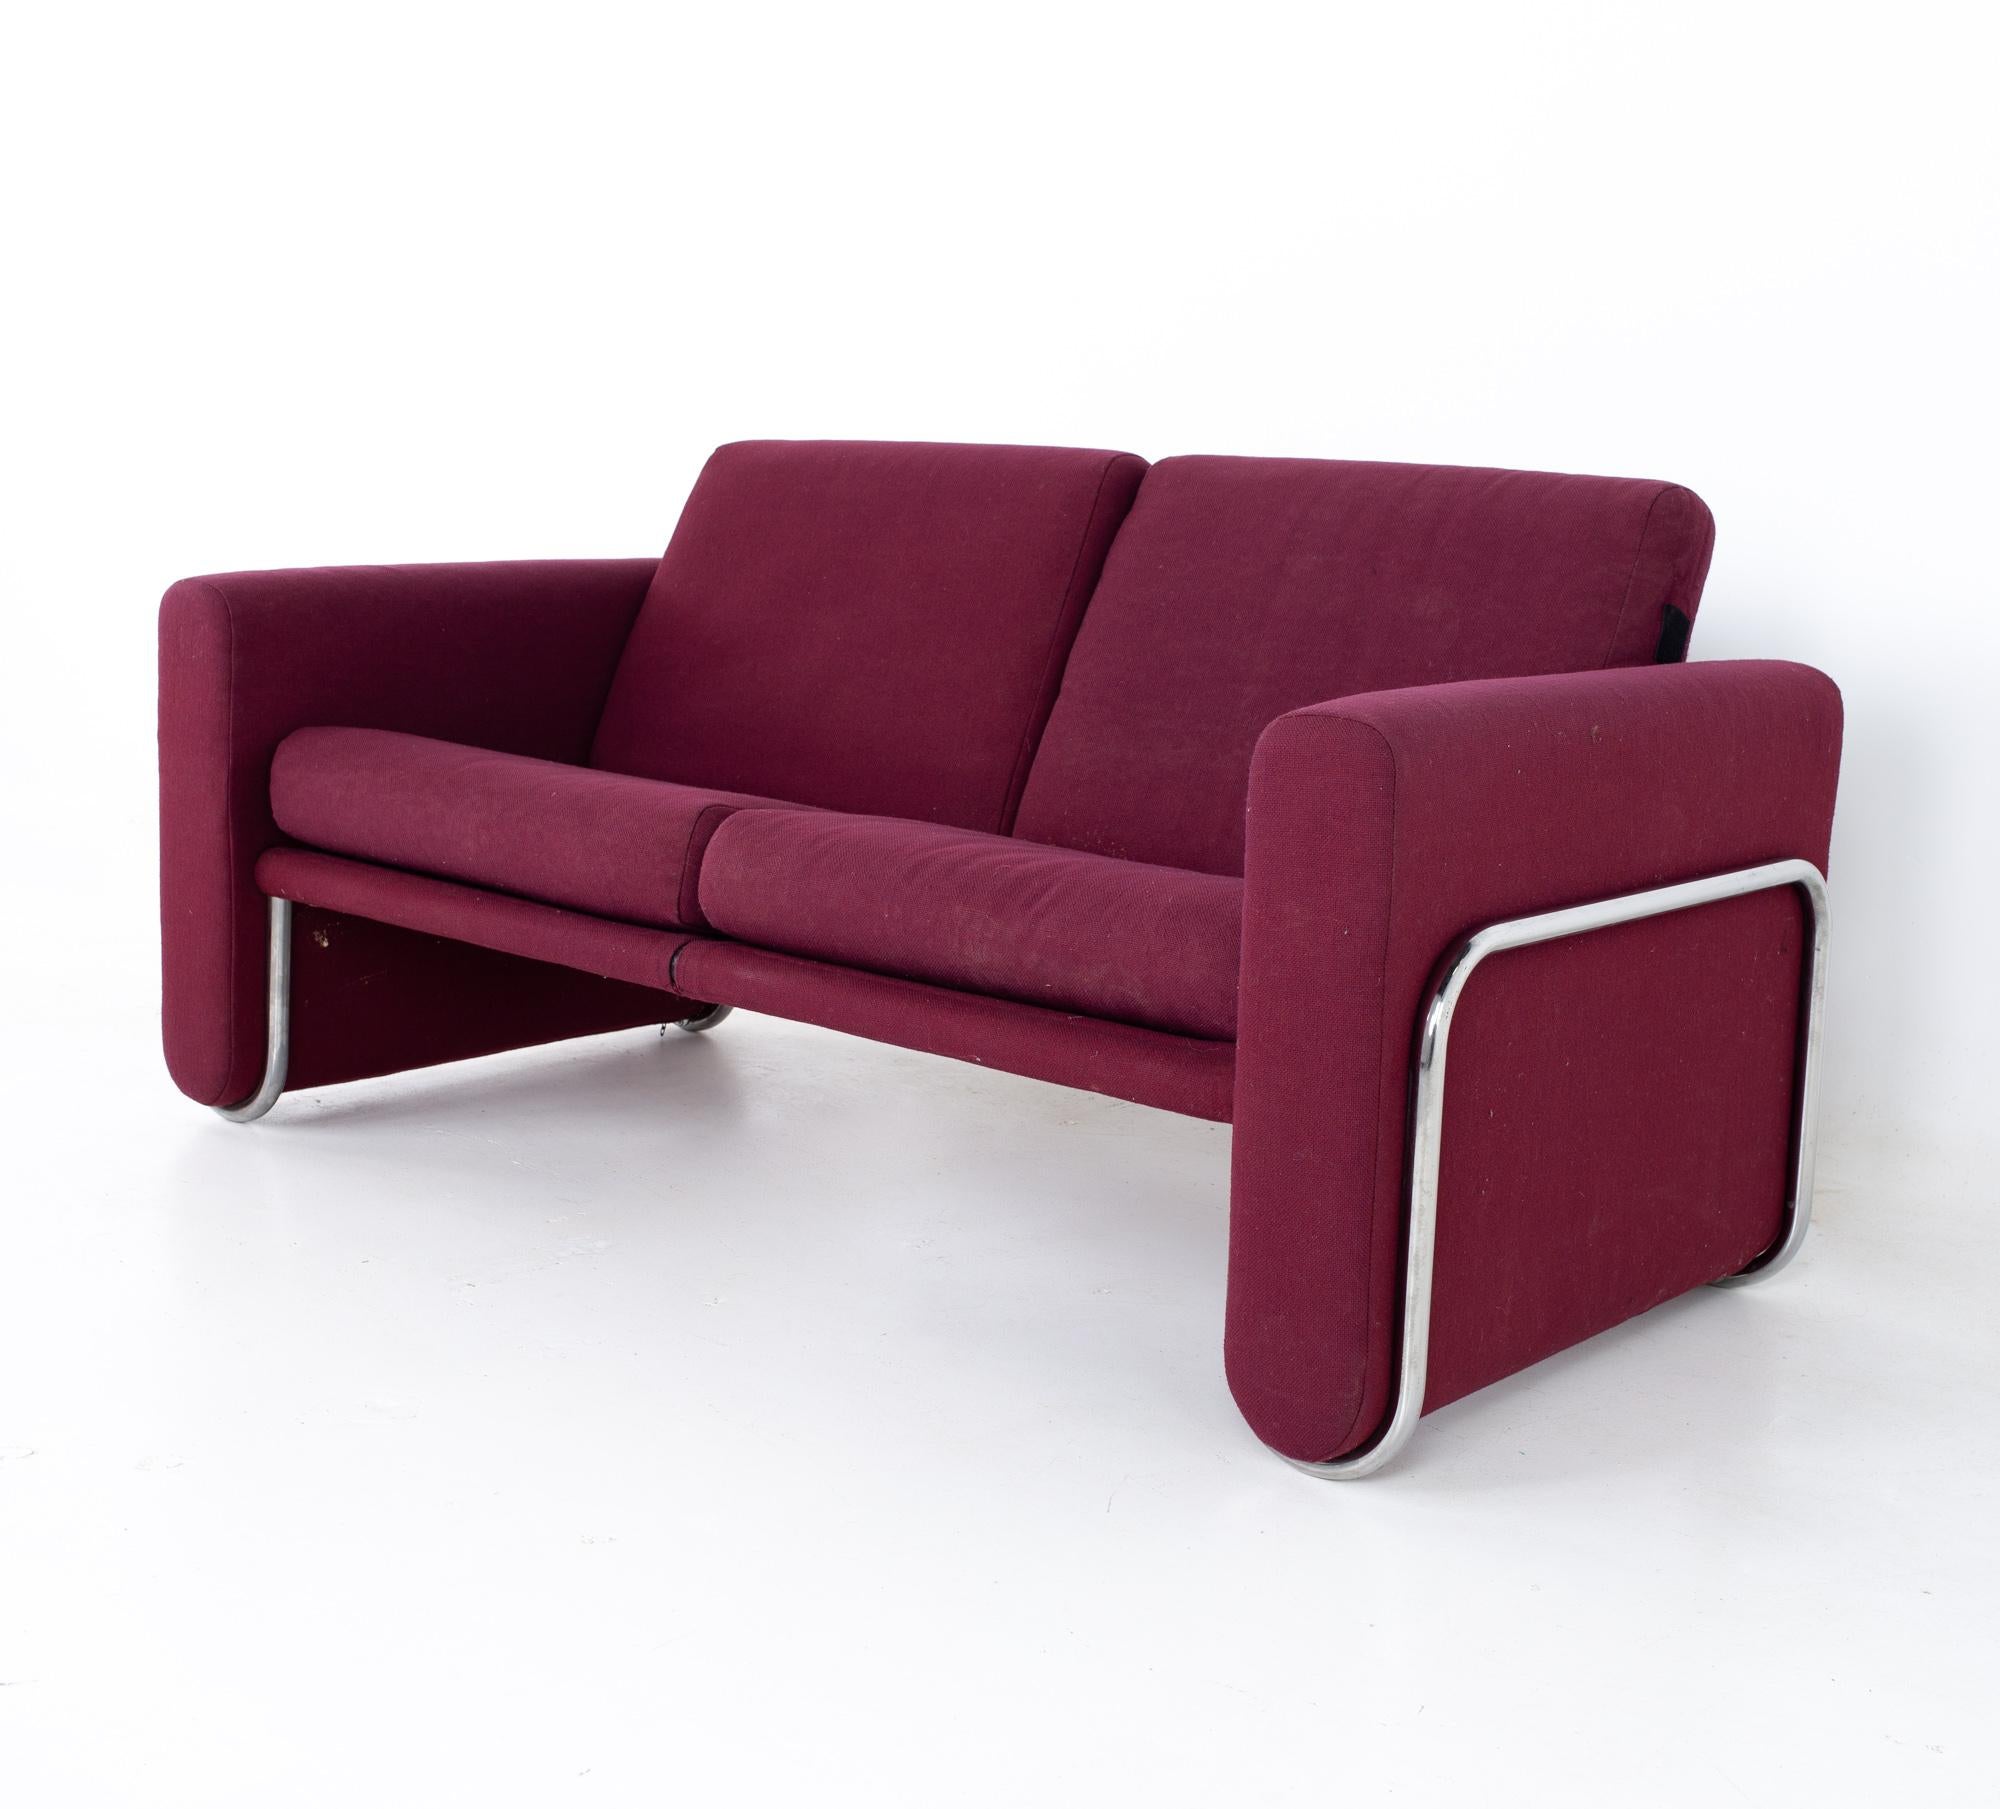 Milo Baughman style mid century cranberry purple and chrome loveseat setee sofa.
Sofa measures: 60.5 wide x 31 deep x 31.25 high, with a seat height of 17.5 inches 

All pieces of furniture can be had in what we call restored vintage condition.